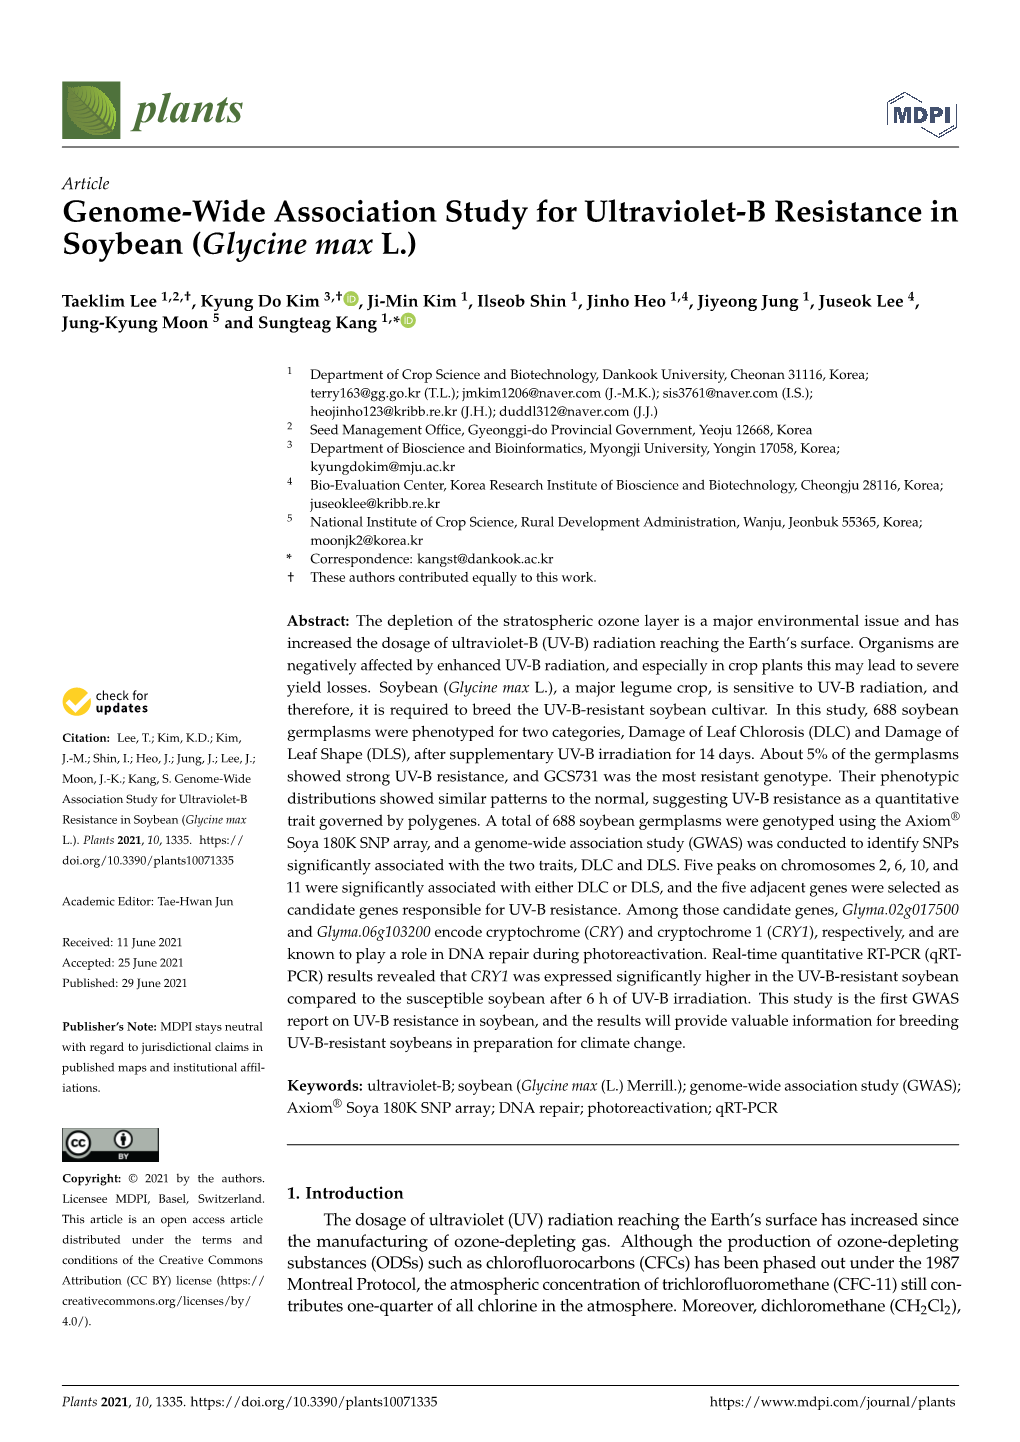 Genome-Wide Association Study for Ultraviolet-B Resistance in Soybean (Glycine Max L.)